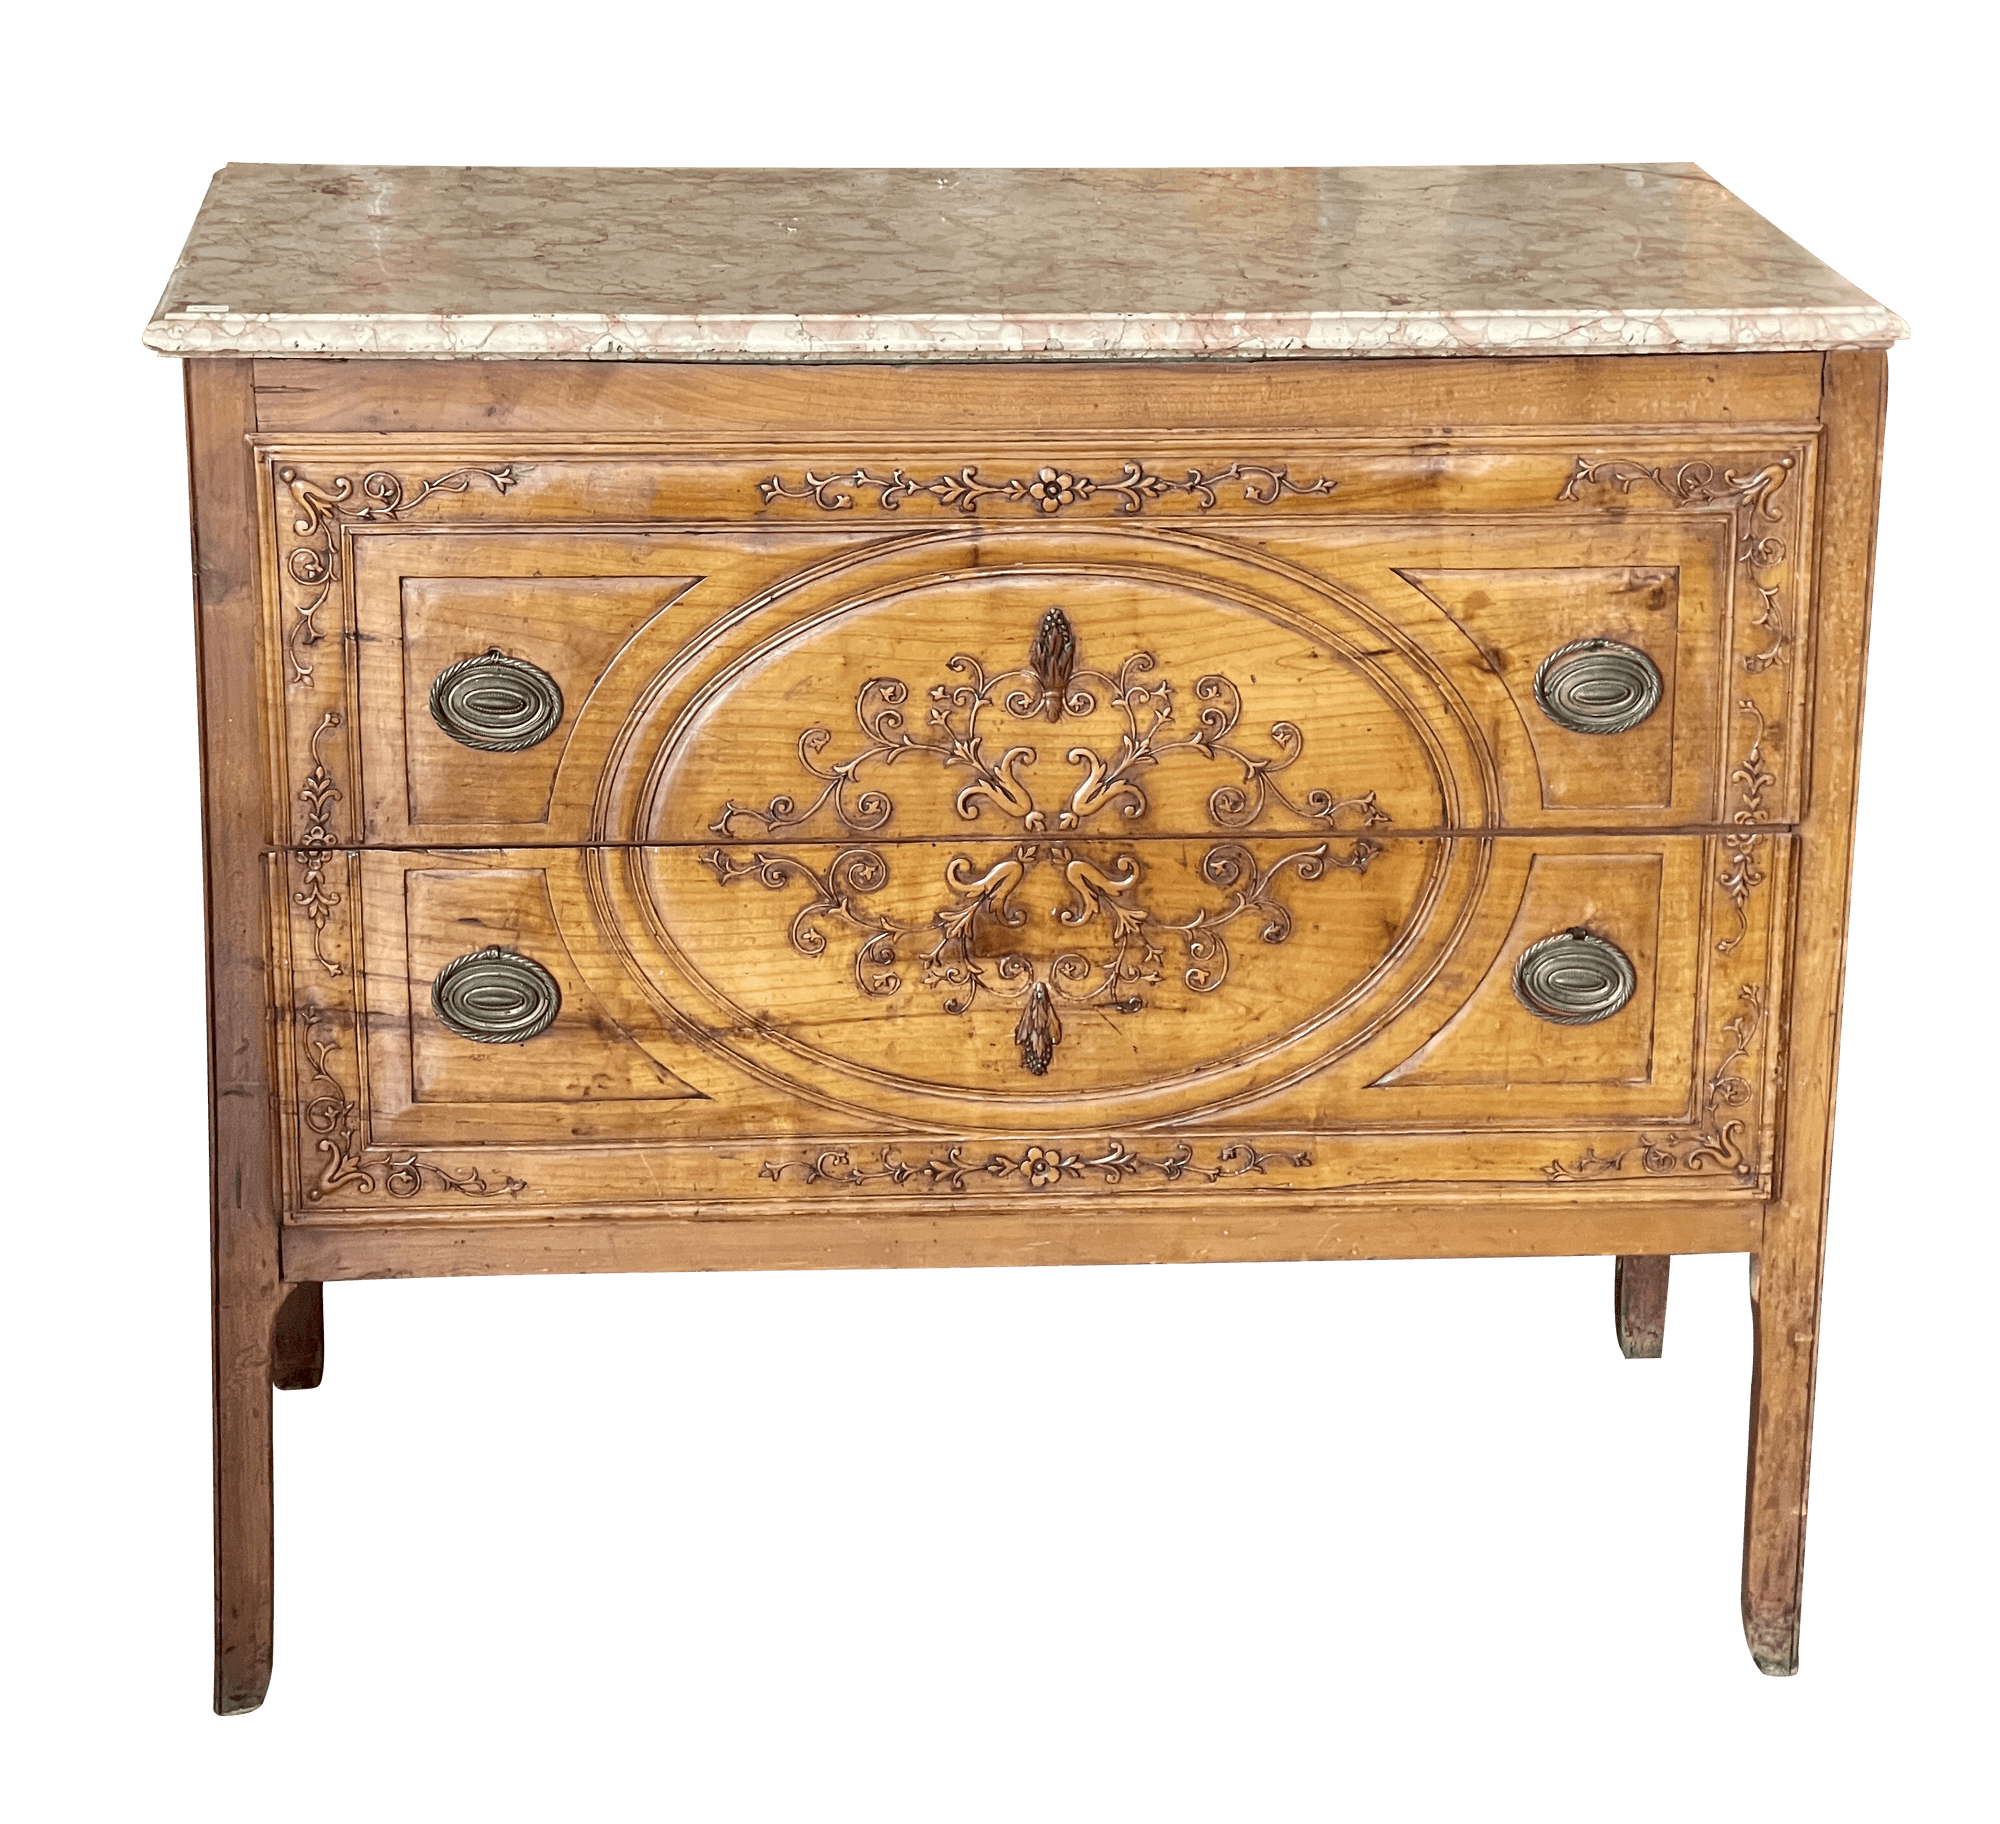 An Italian Carved Fruitwood Marble-Top Commode, c. 1790